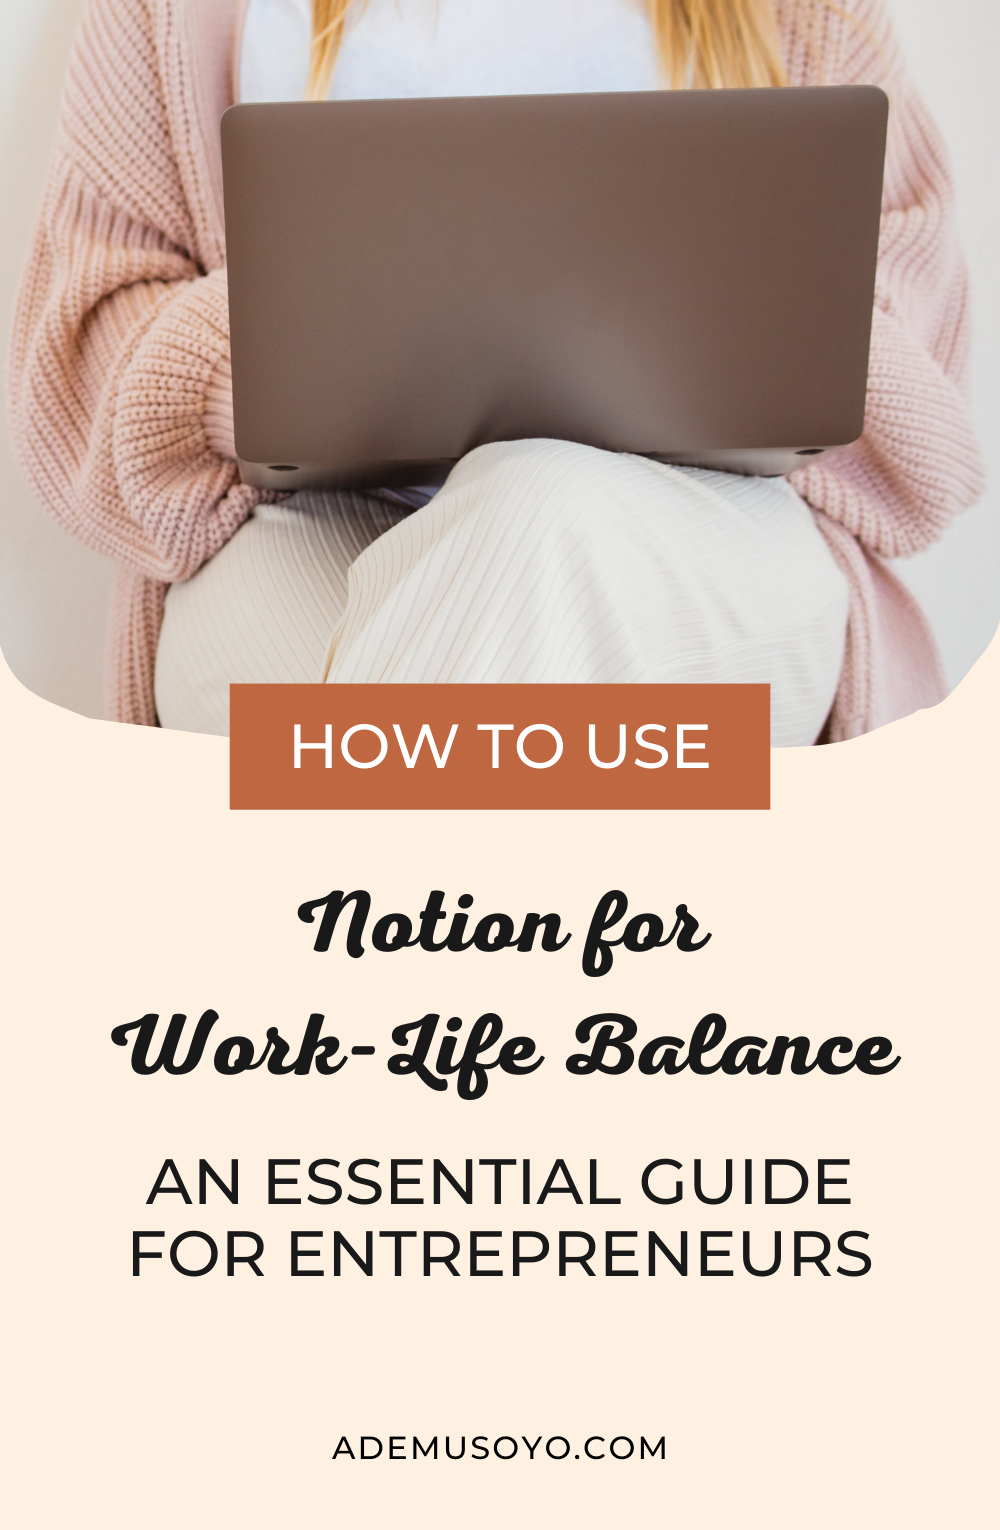 Empower yourself by harnessing the power of Notion for work-life balance. Discover Notion tips and techniques tailored specifically to every entrepreneur needs. Enhance your time management skills, prioritize self-care, and achieve a fulfilling work-life integration. Check out our website ademusoyo.com for more work productivity tips like these.